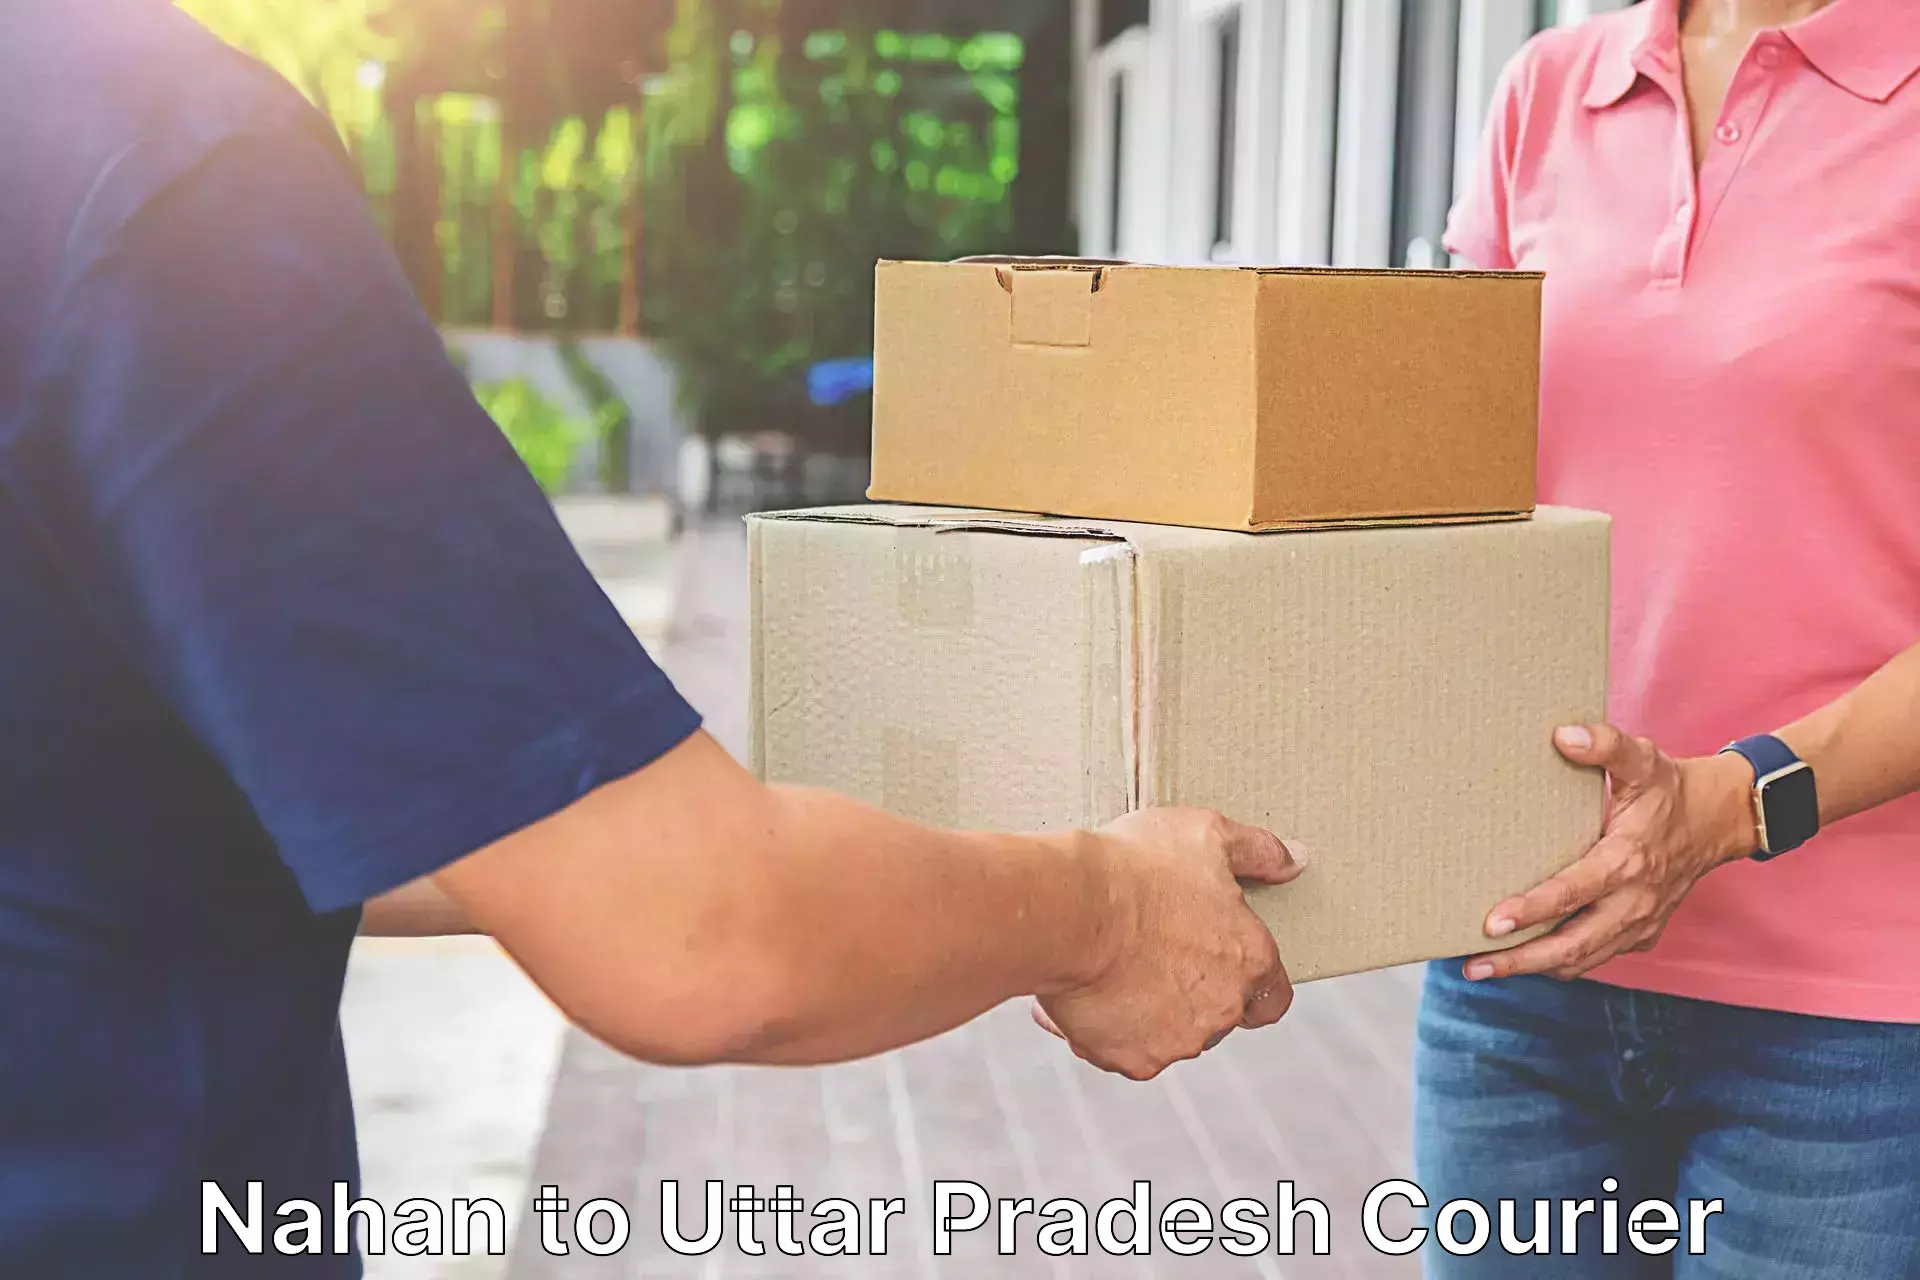 Customized delivery options Nahan to Aligarh